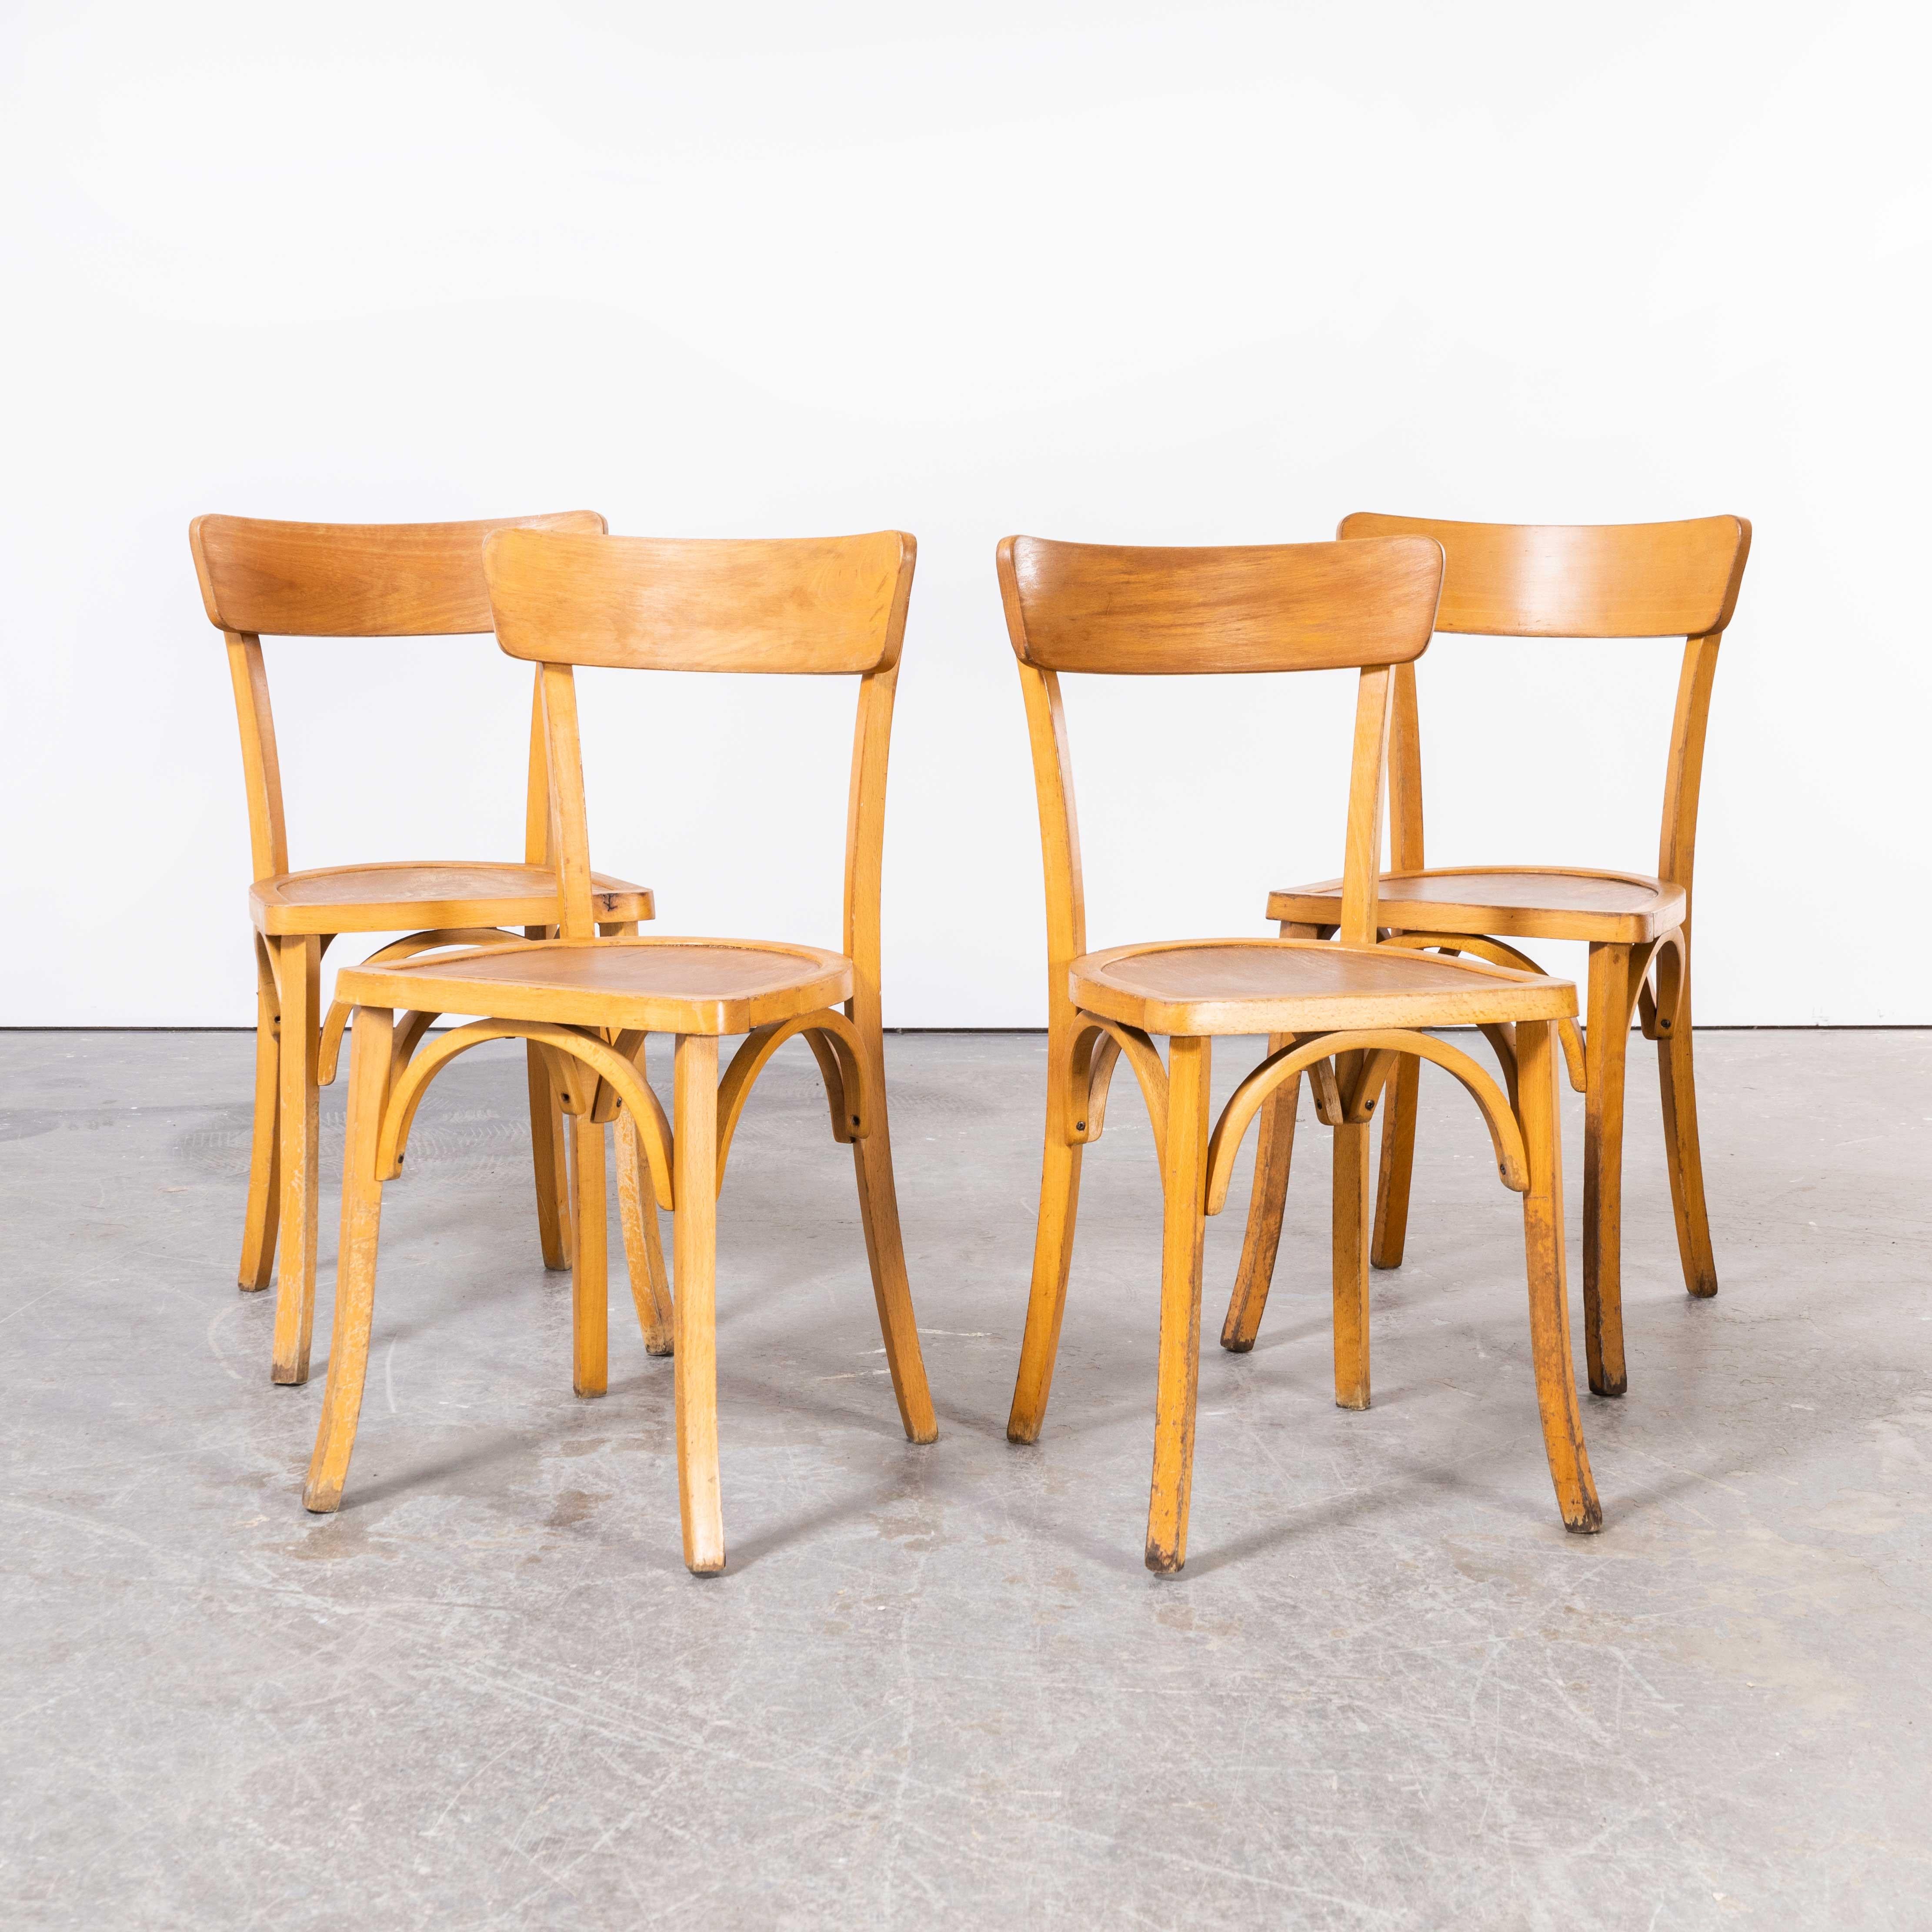 1950's French Baumann Blonde Kick Leg Bentwood Dining Chairs, Set of Four For Sale 7